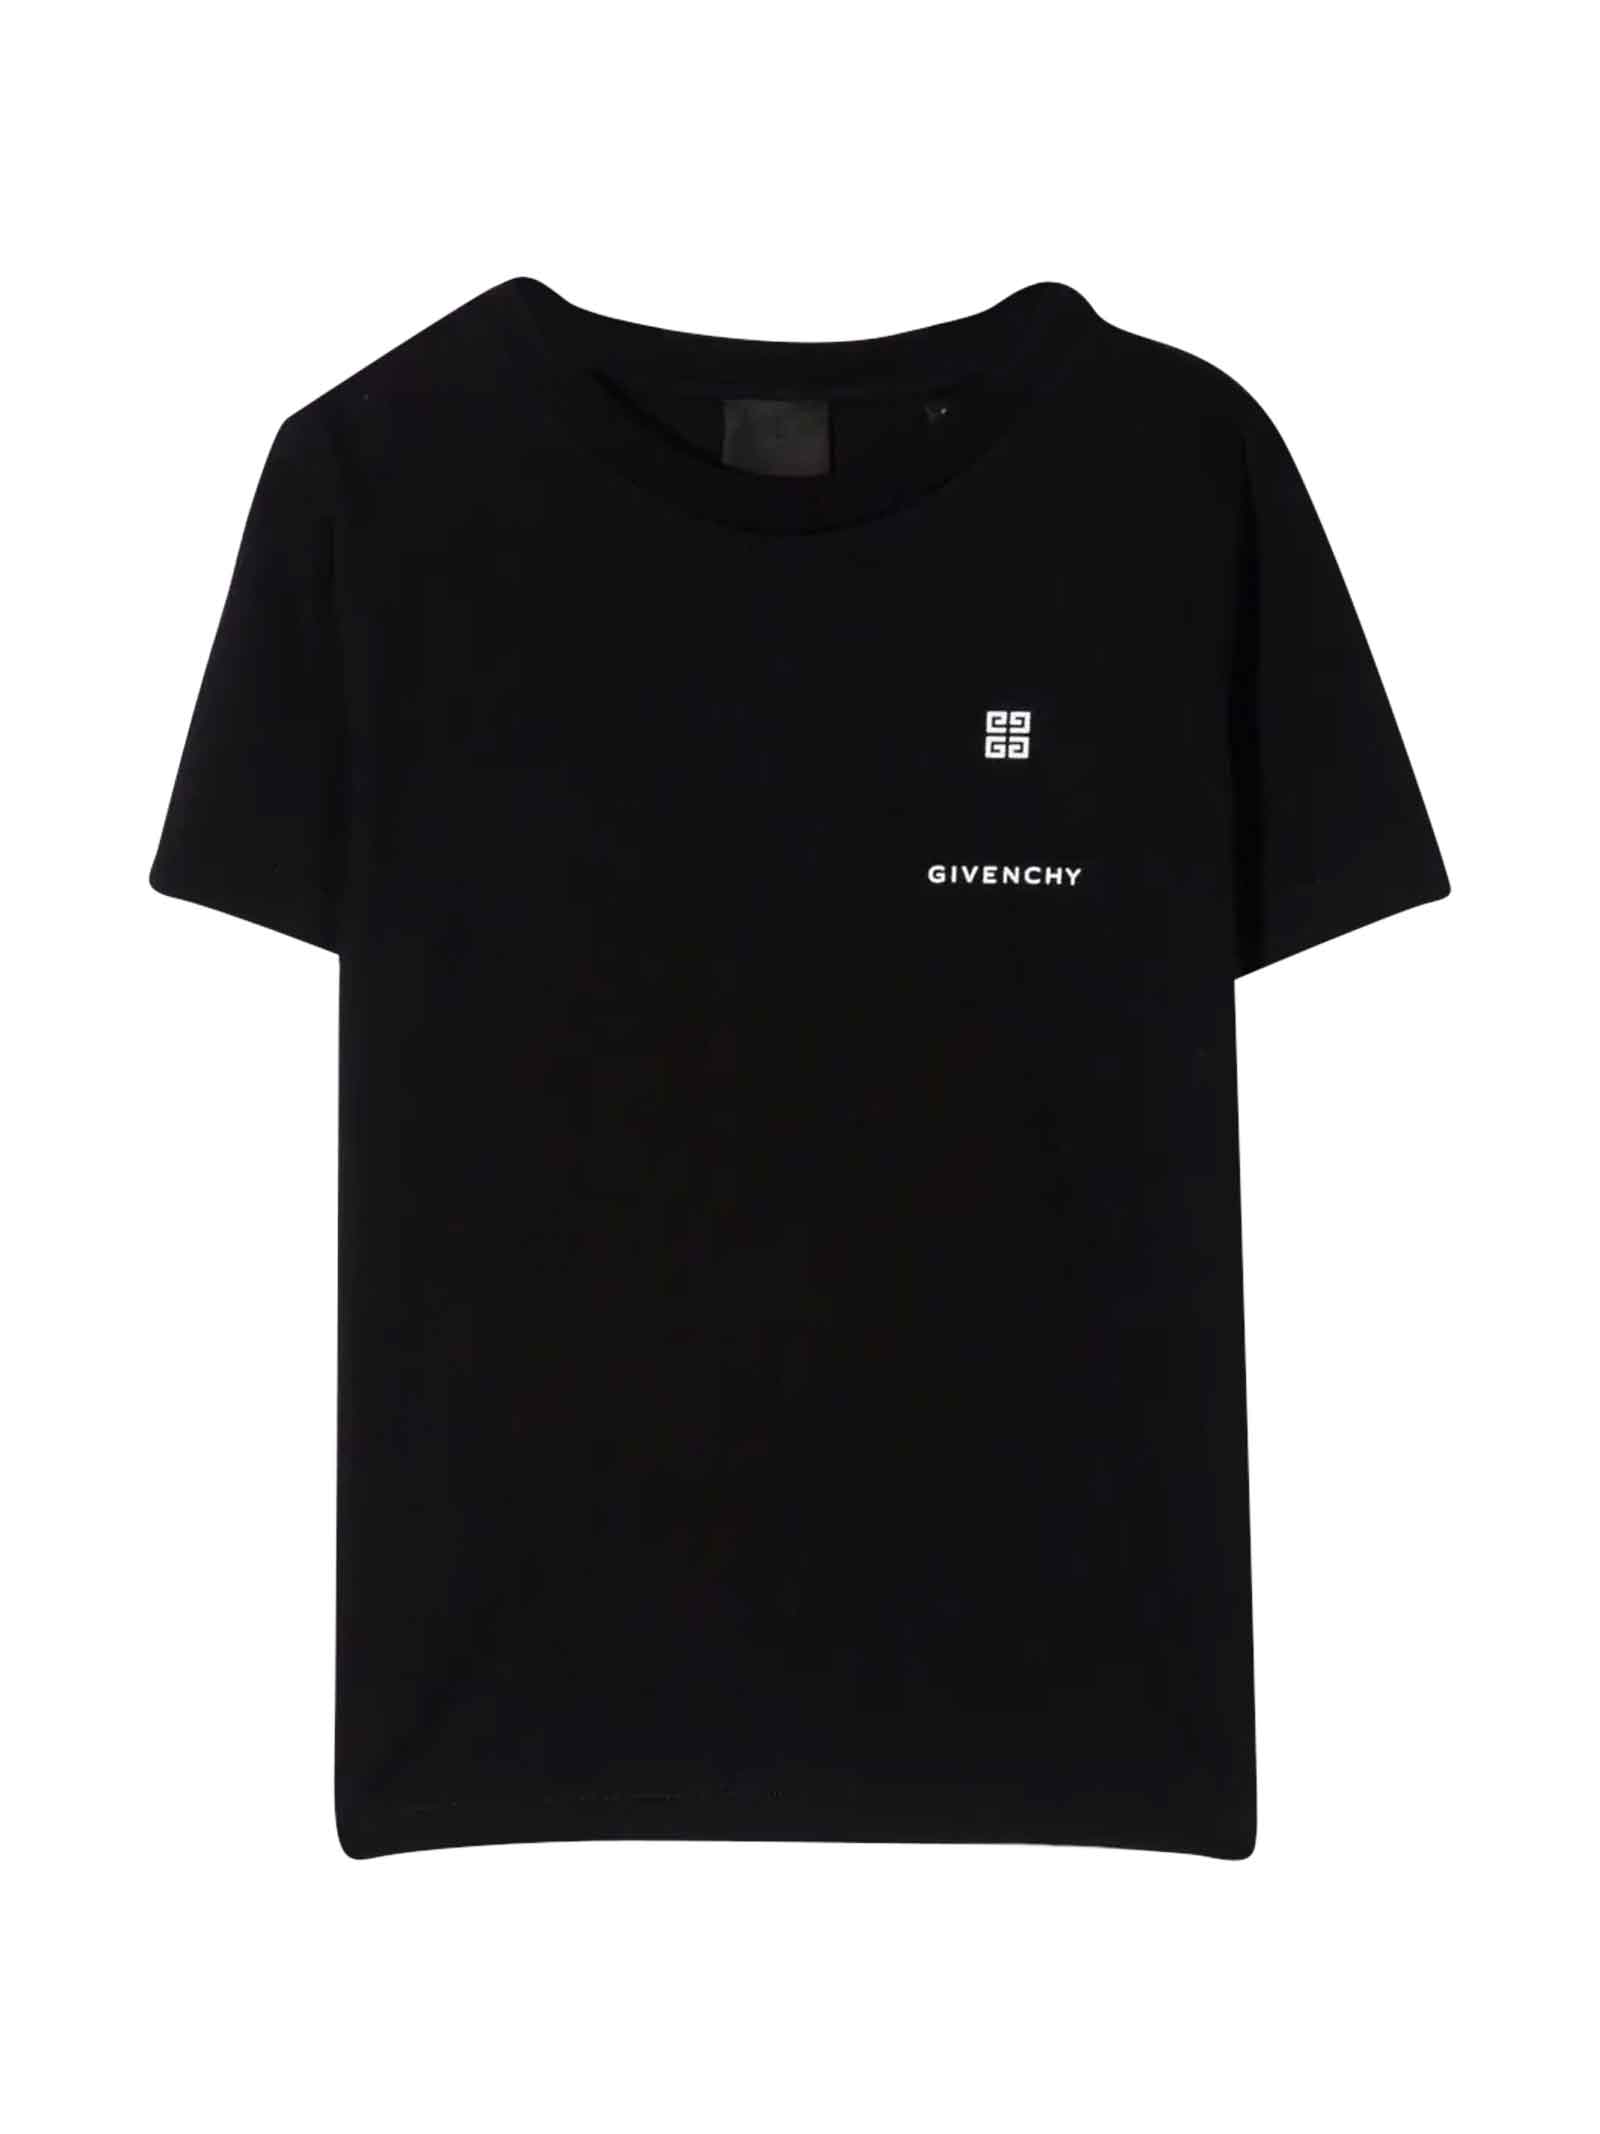 Givenchy Black T-shirt With White Logo